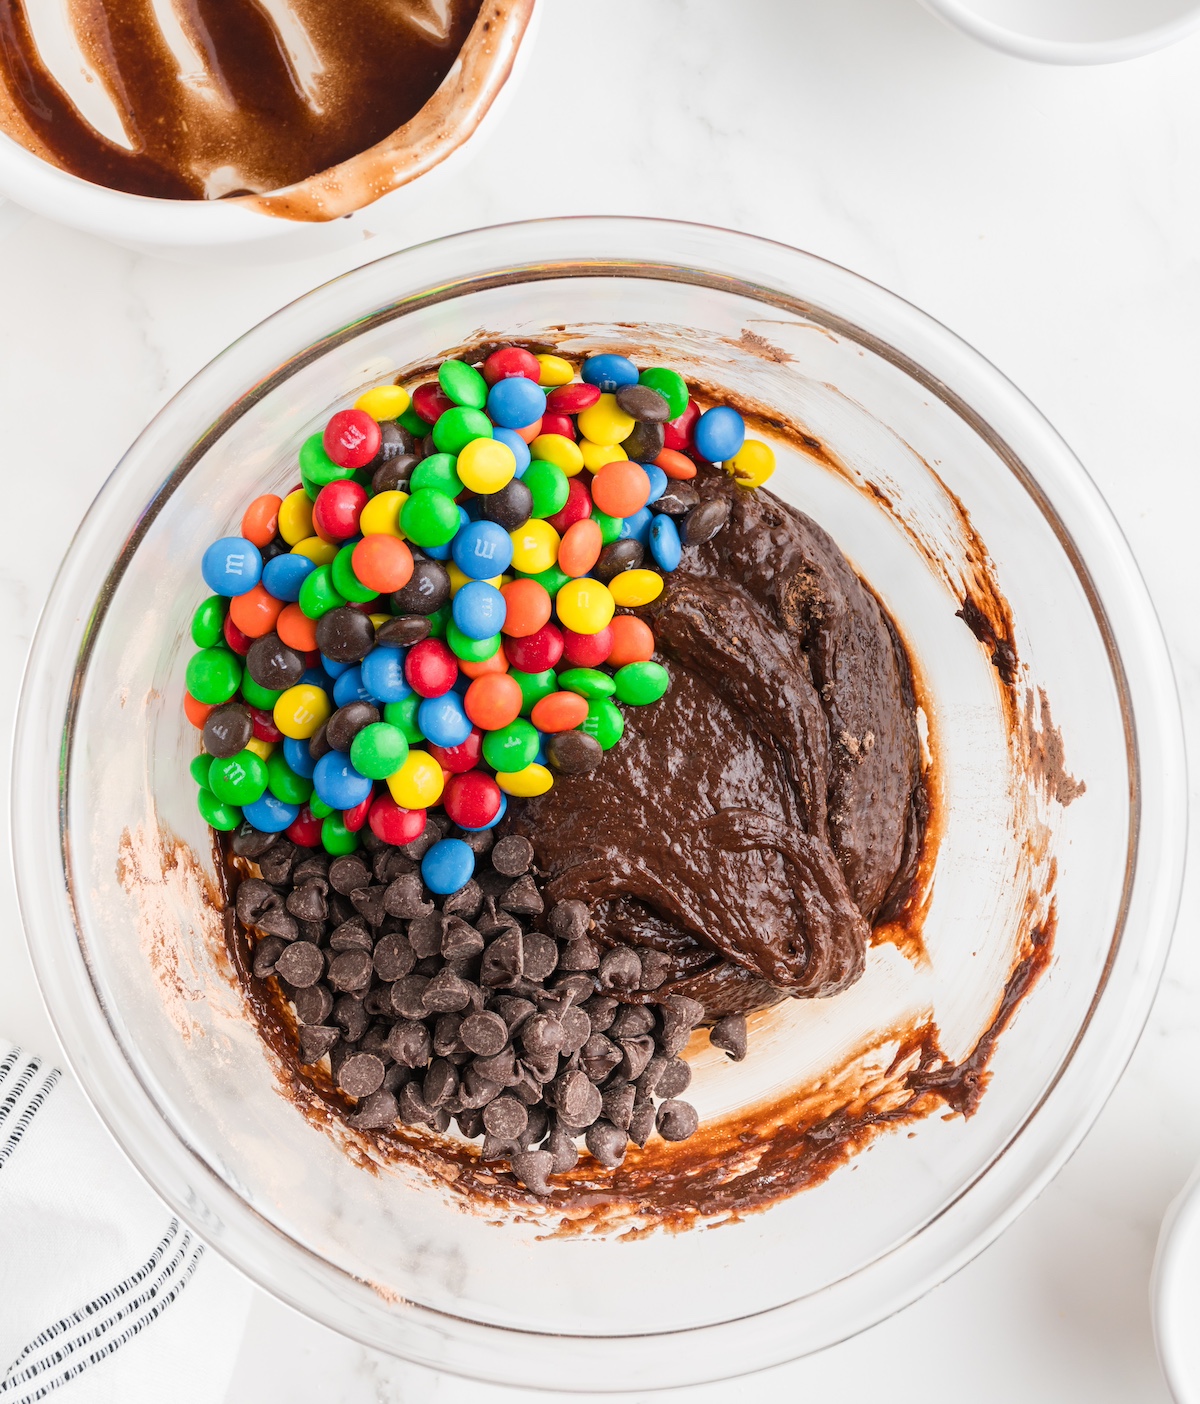 M&Ms and chocolate chips folded into the batter